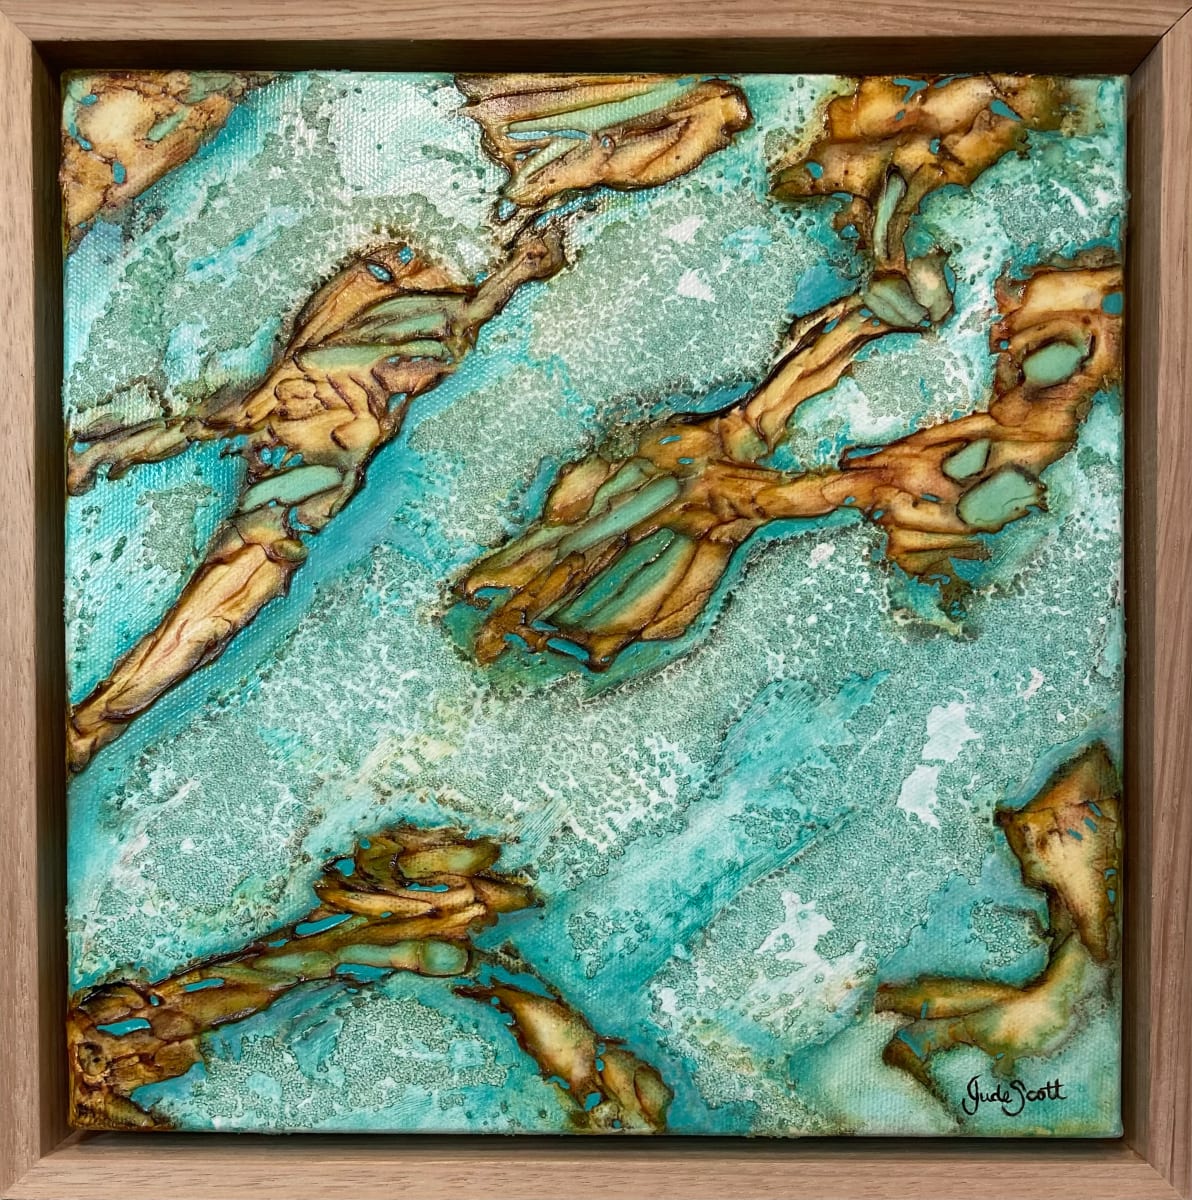 Rock Pools 2 by Jude Scott  Image: Emotional connection informs this intuitive textured abstract, created from childhood memories of playing in rock pools.  Stretched canvas in an Australian Victorian ash float frame.